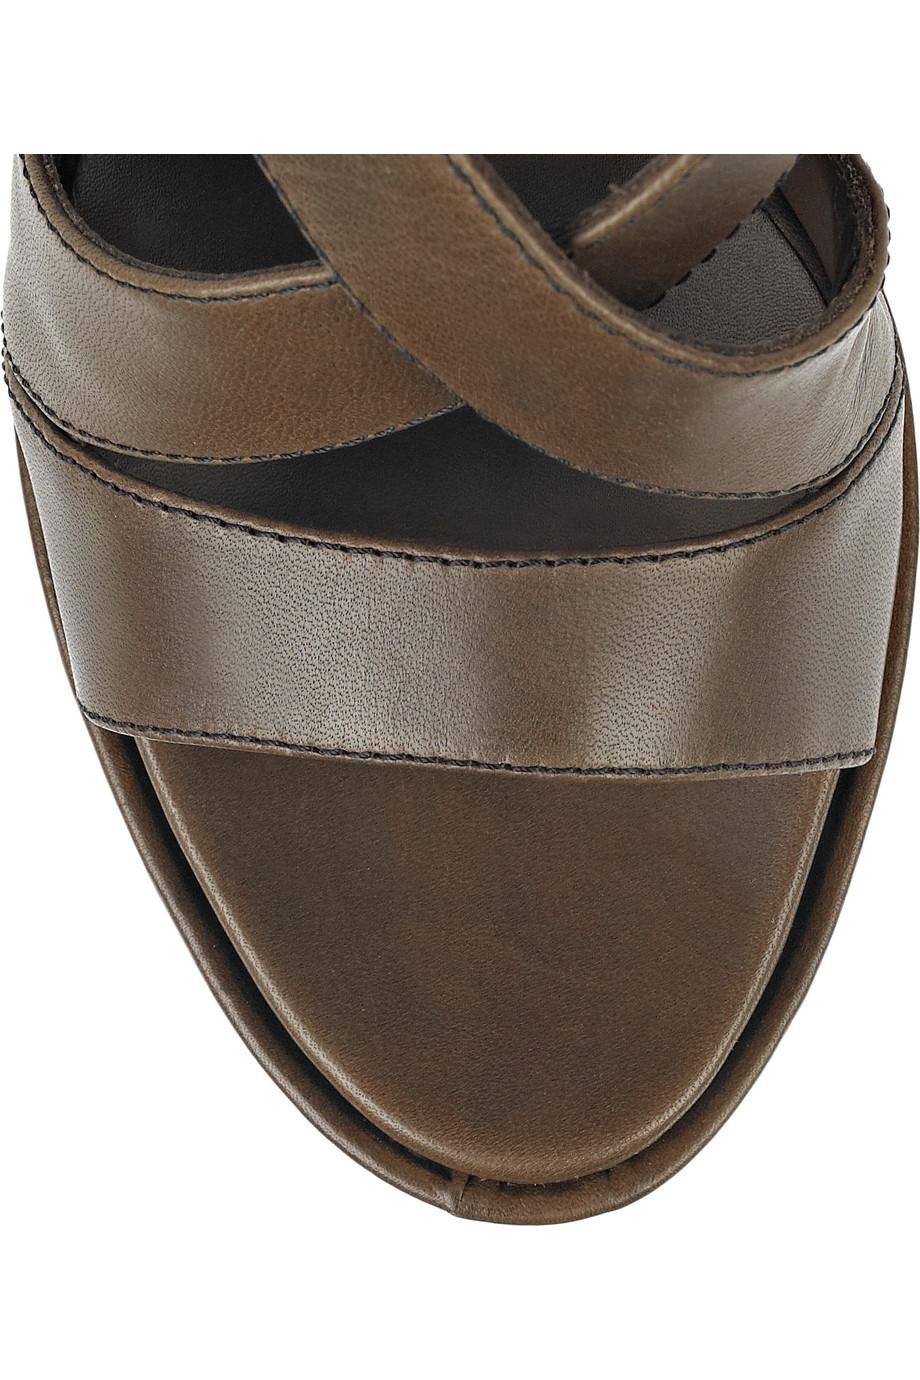 brown leather wedge